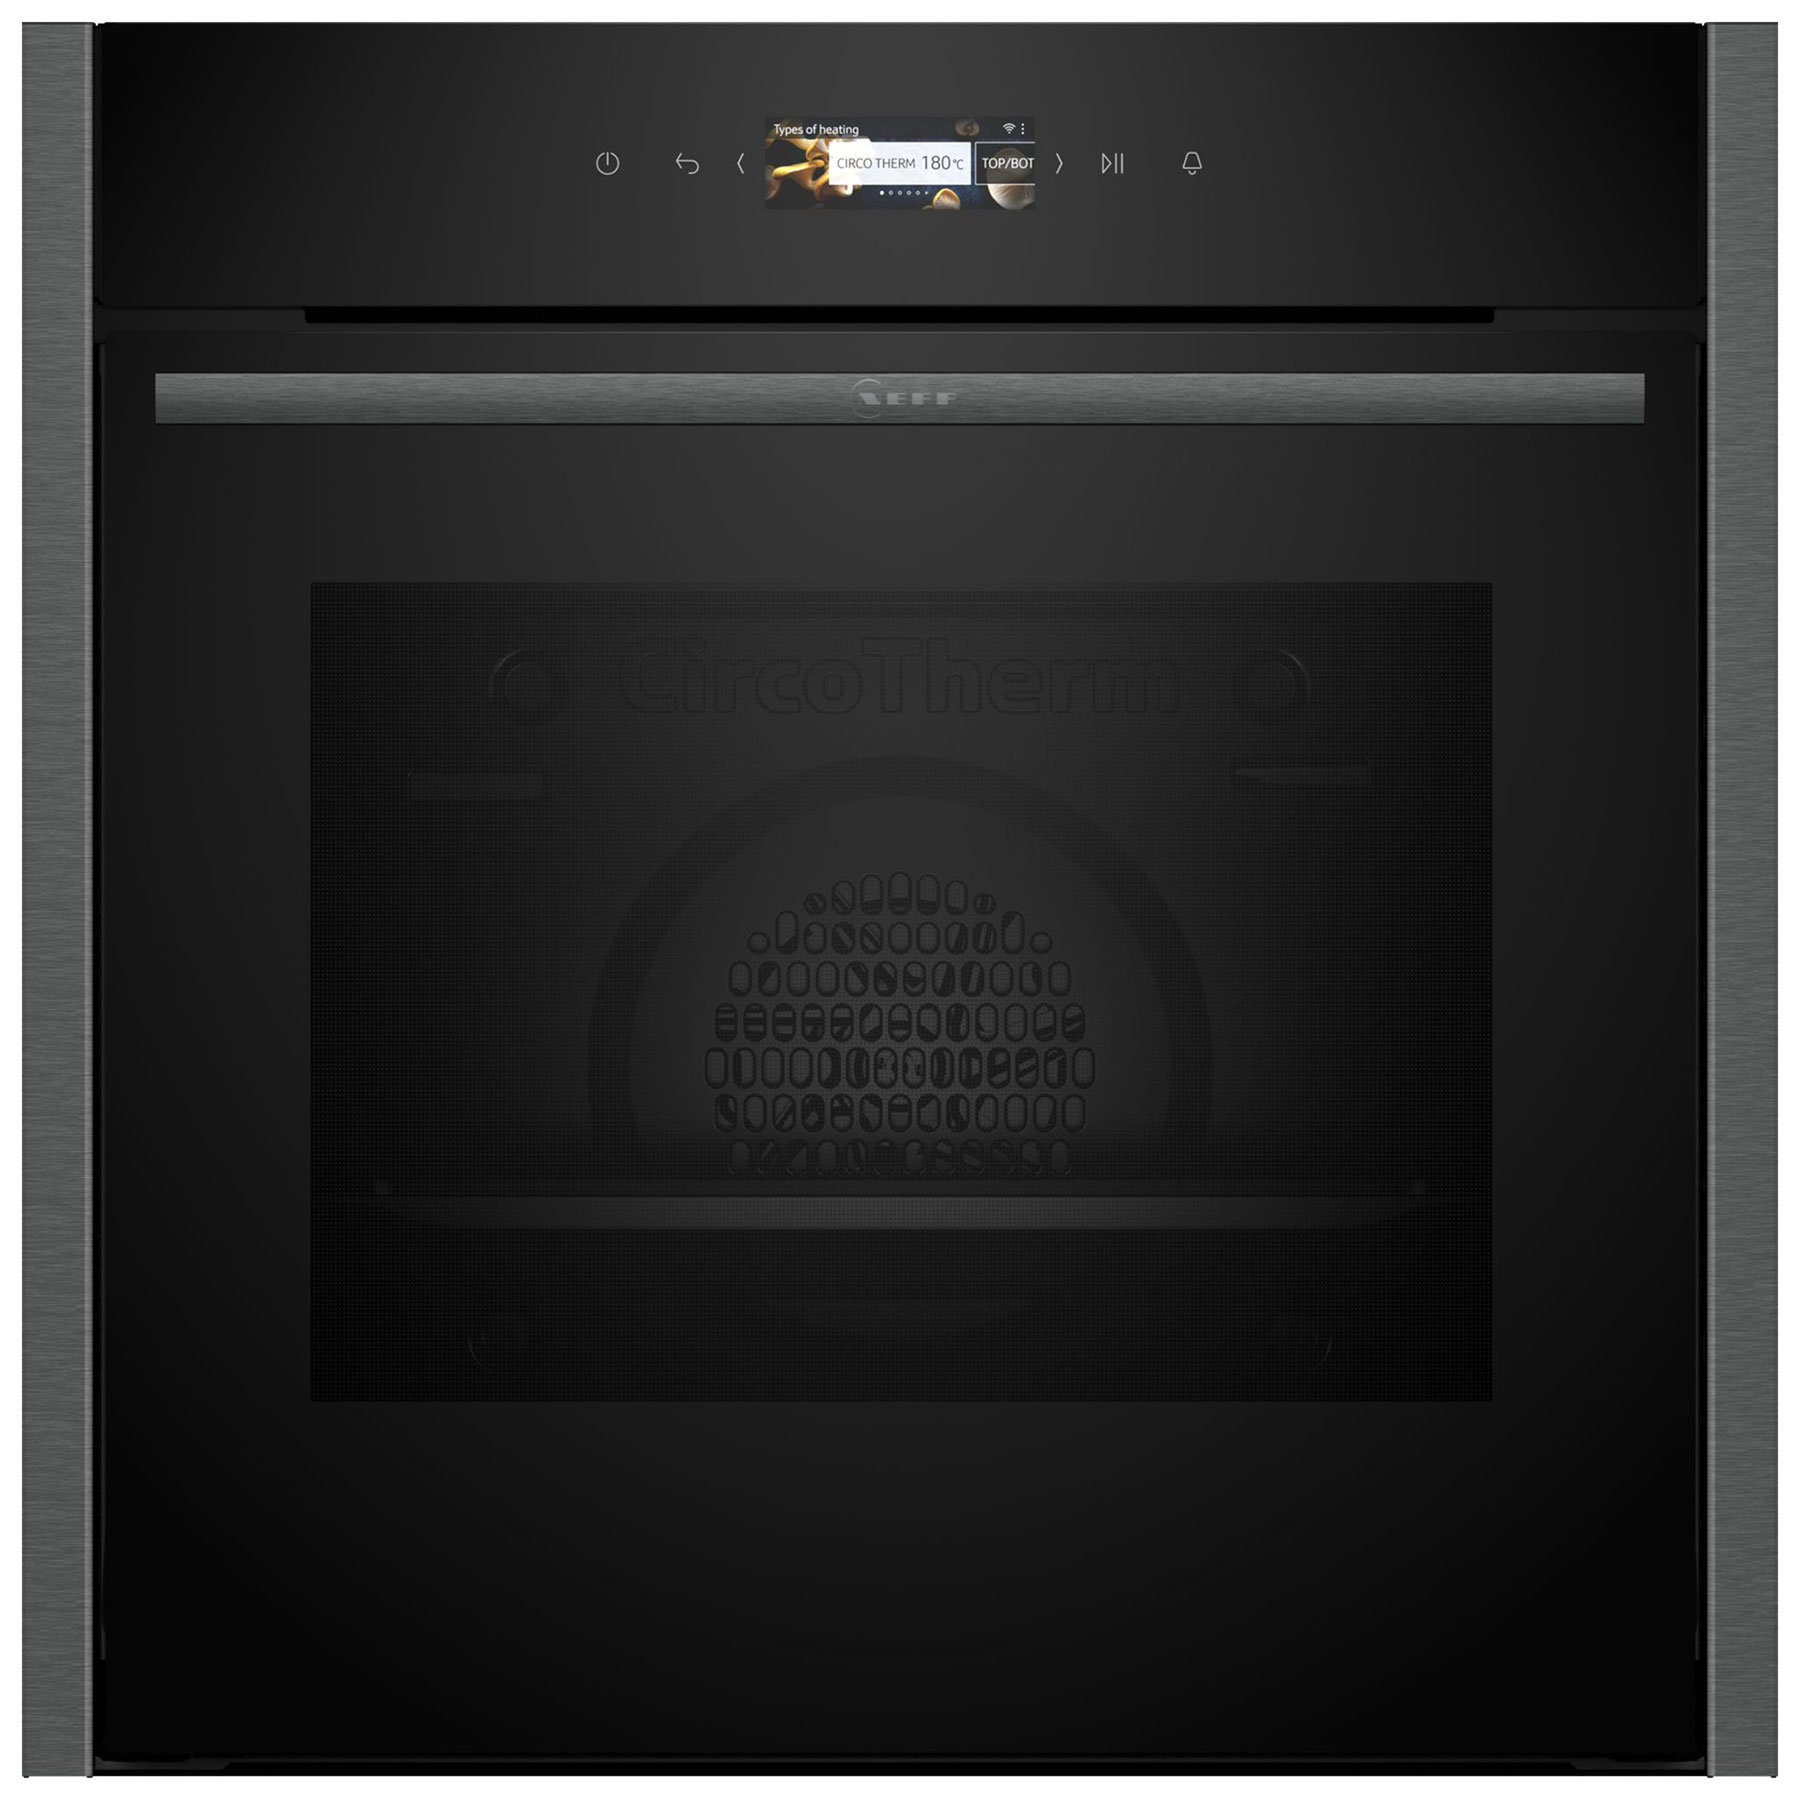 Image of Neff B24CR71G0B N70 Built In Electric Pyrolytic Oven in Black 71L